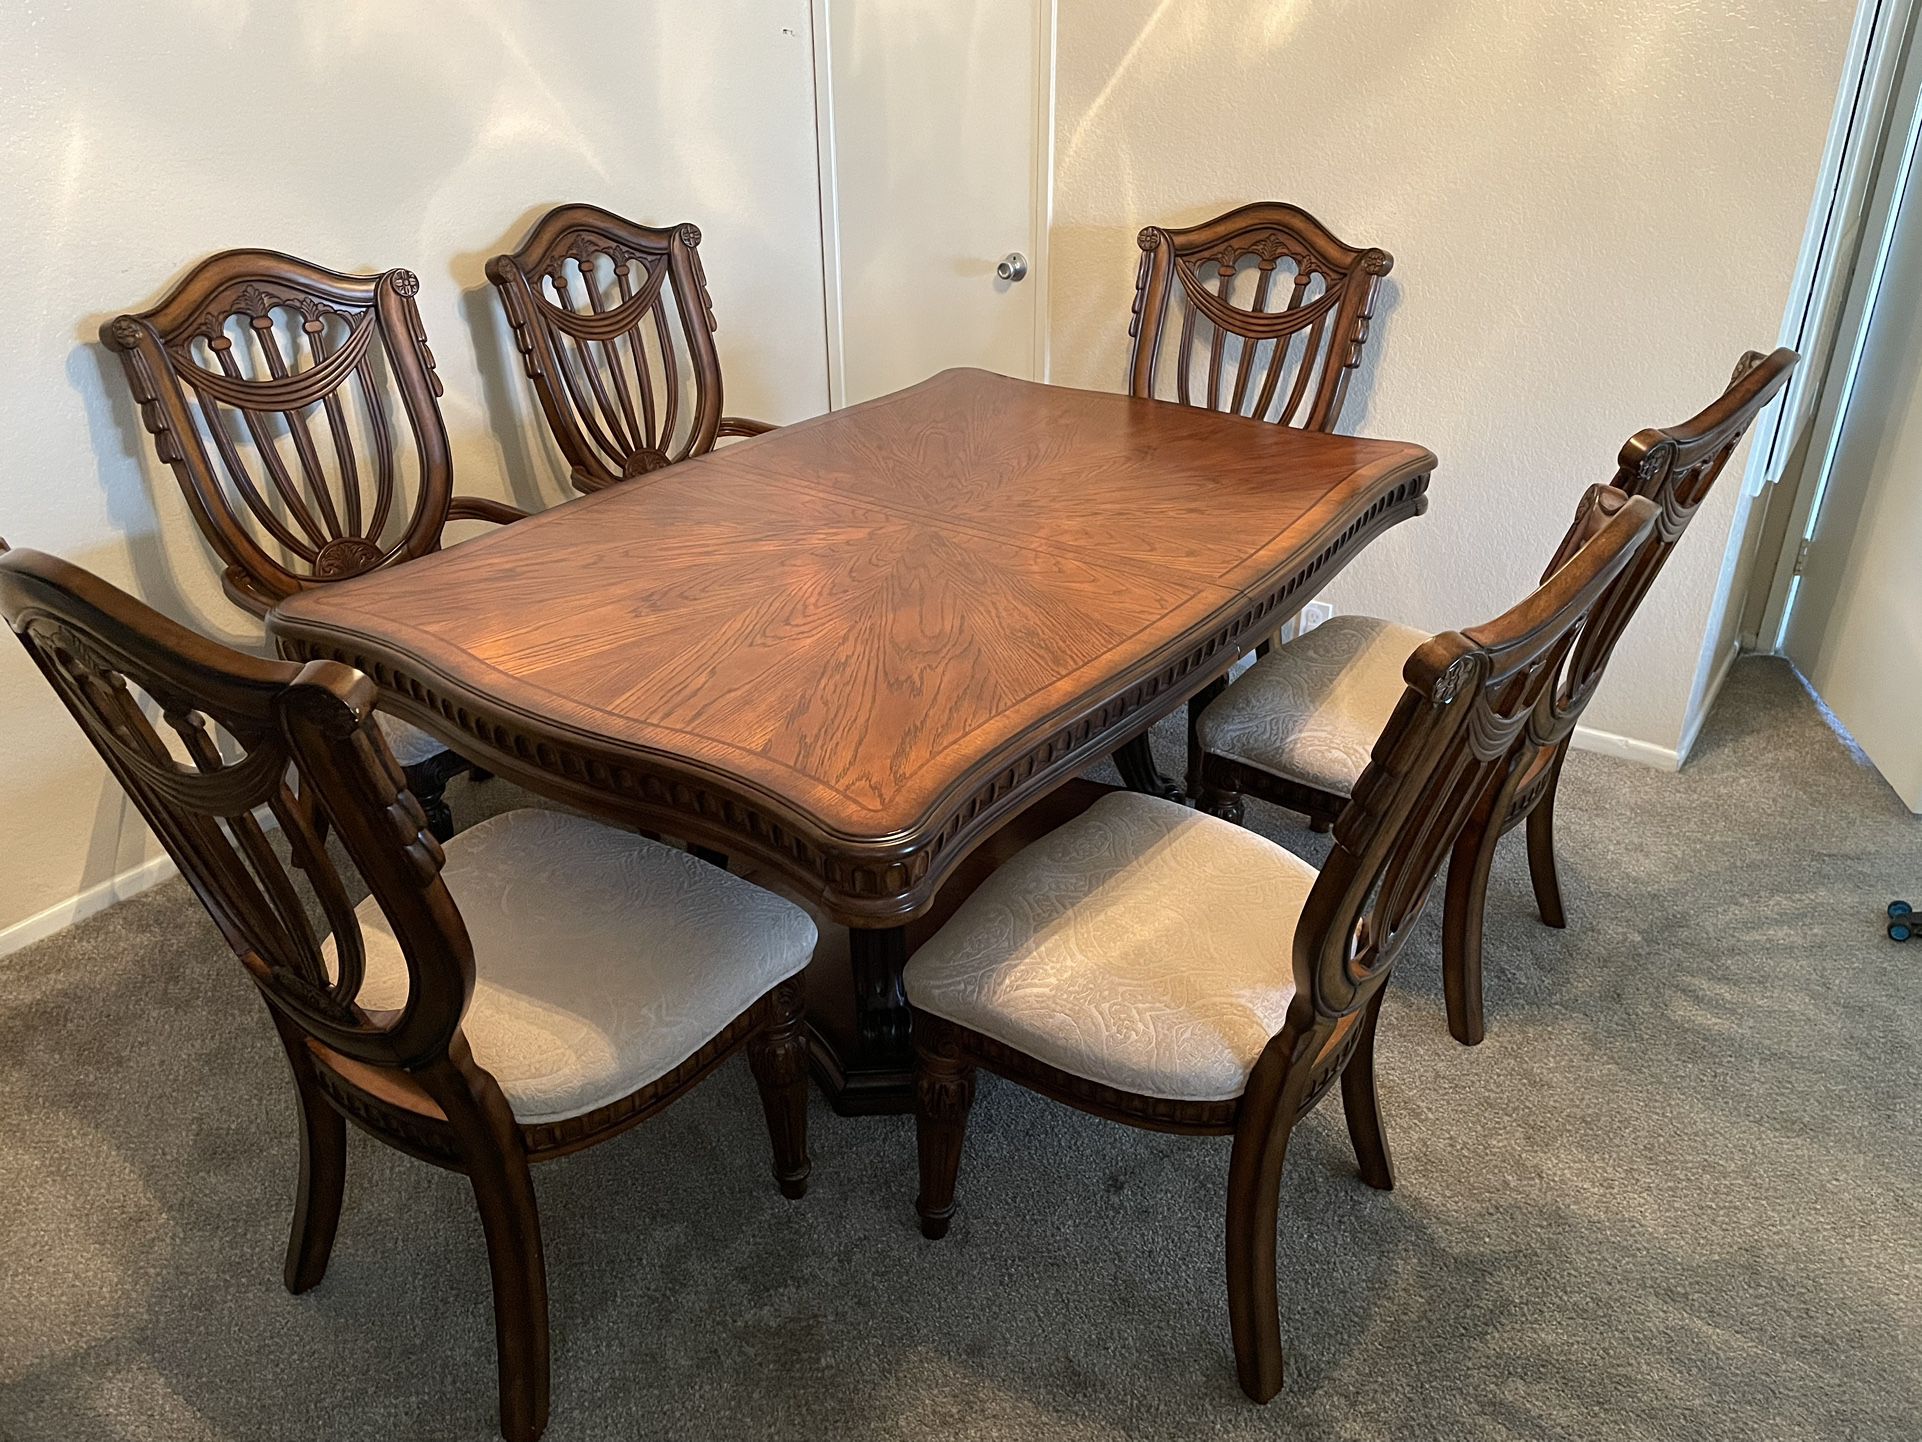 Wood Dining Table Set With Six Chairs